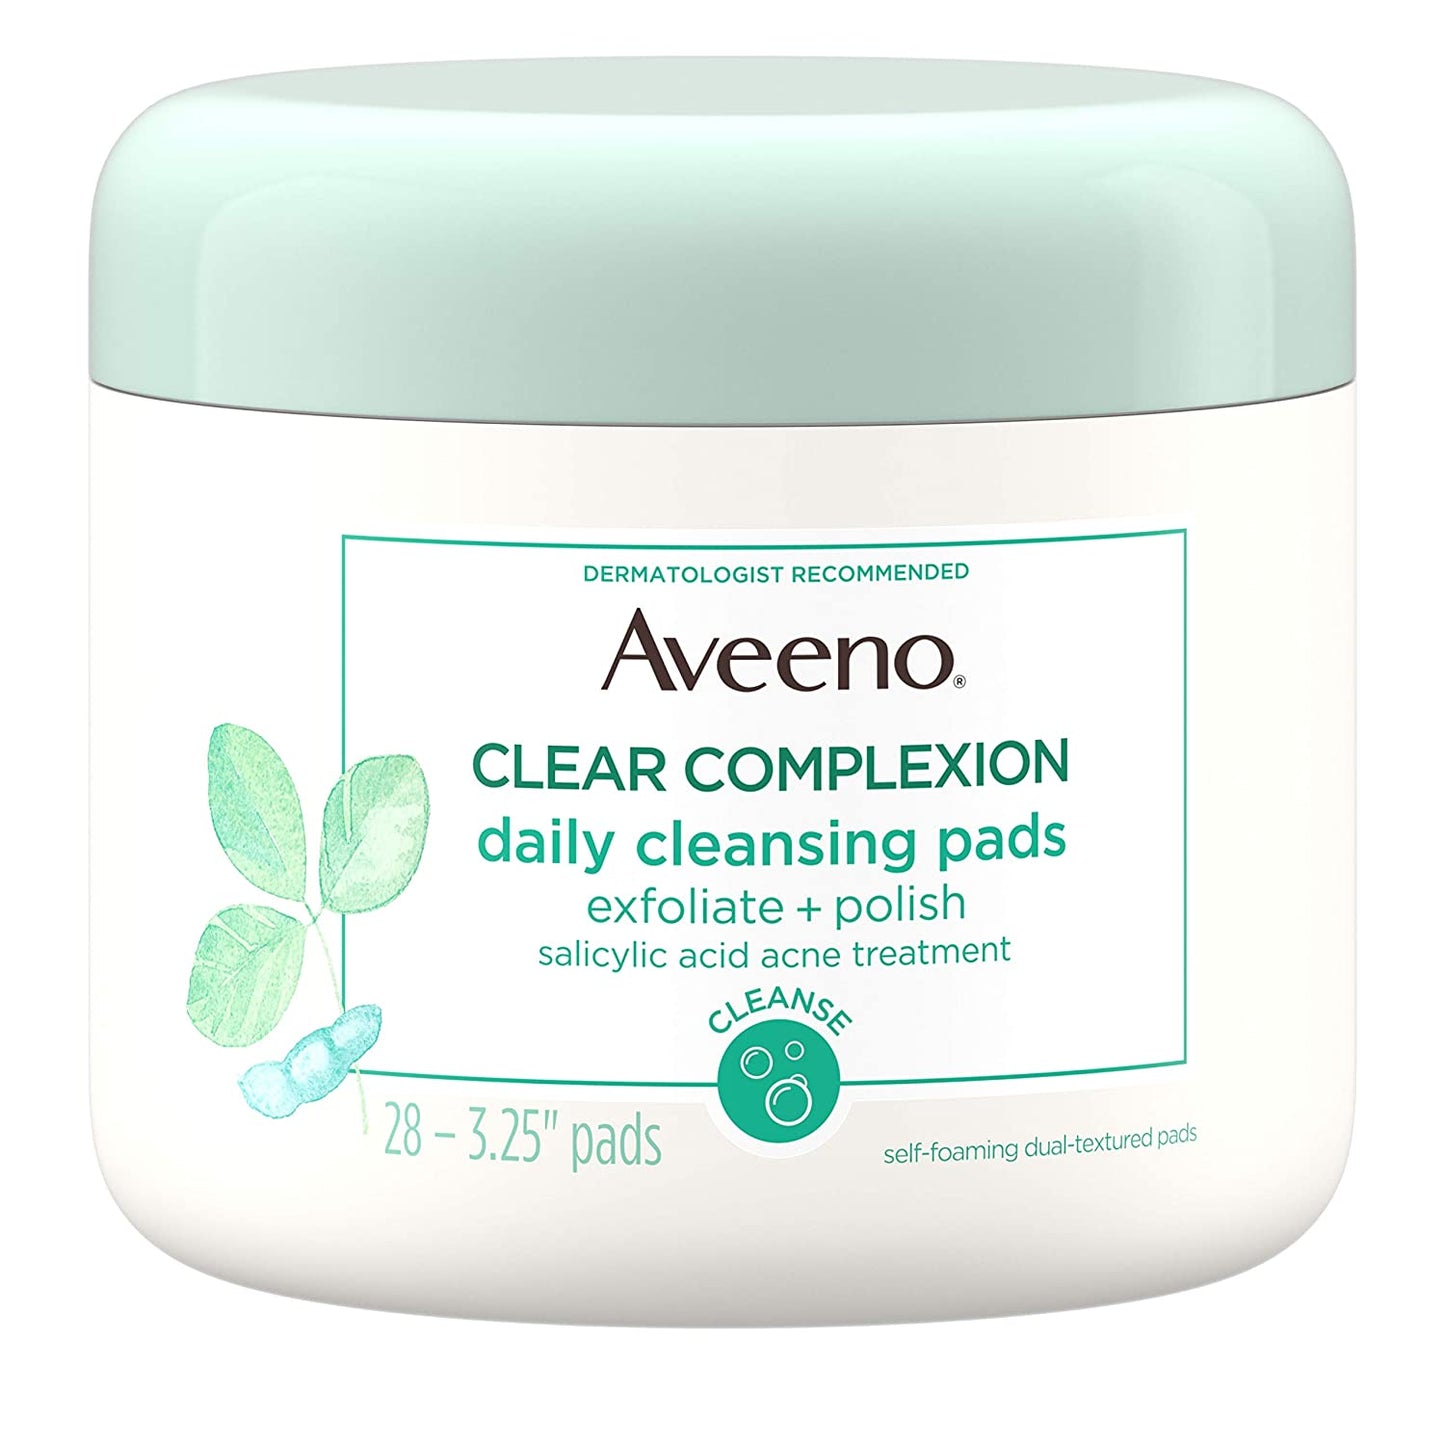 Aveeno Clear Complexion Daily Facial Cleansing Pads With Salicylic Acid Blemish Treatment, 28 Count